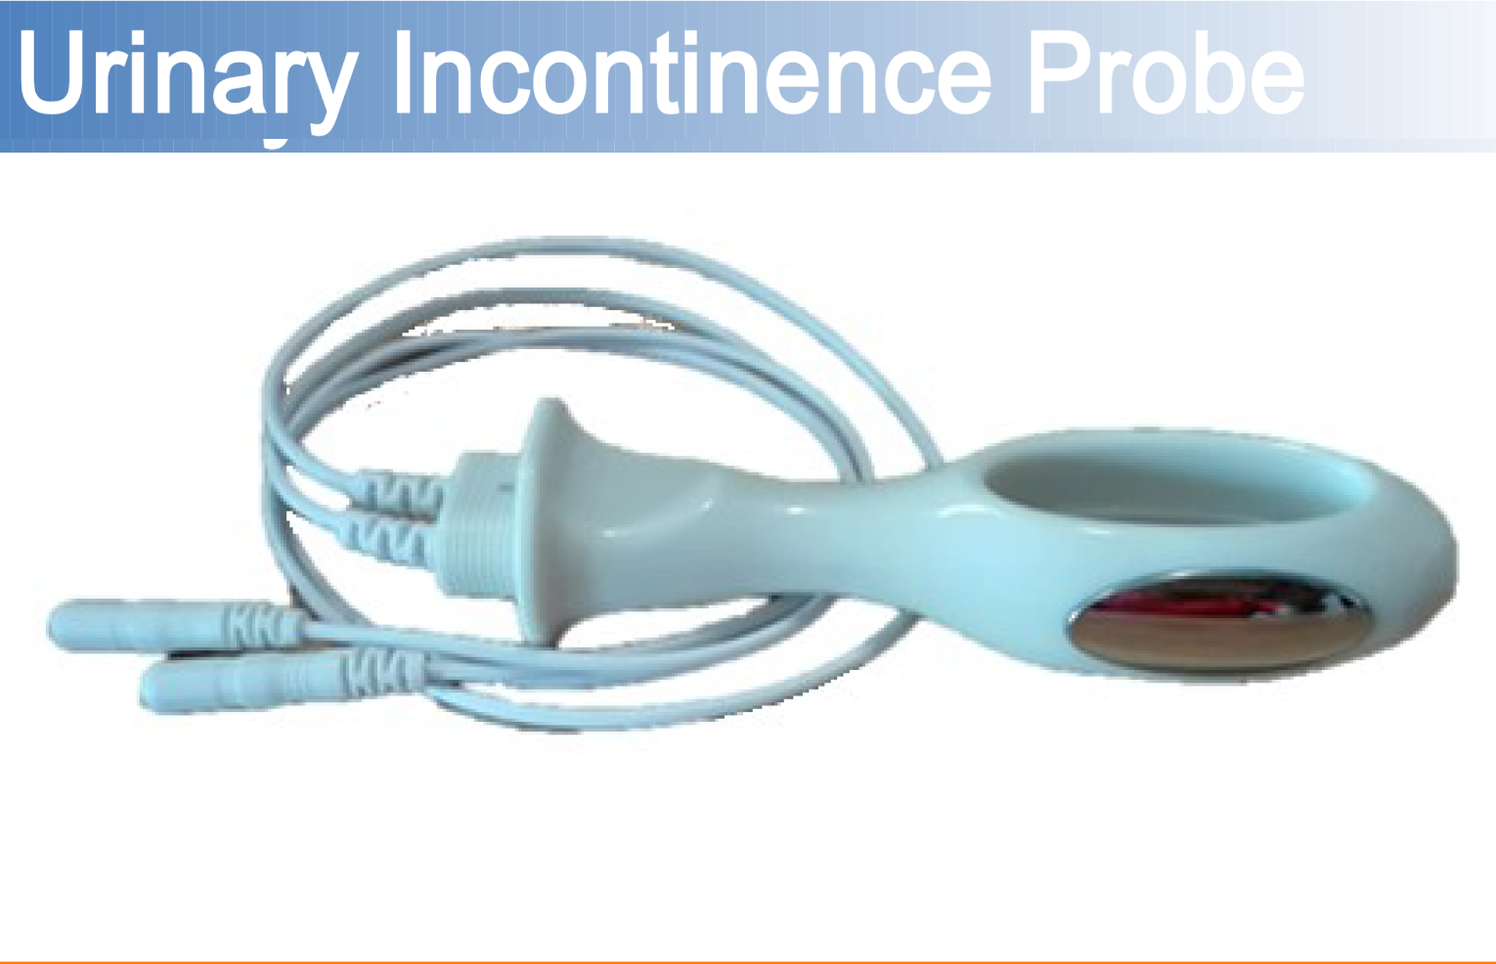 <p><span style="font-weight: bold;">Urinary Incontinence Probe</span><br></p>